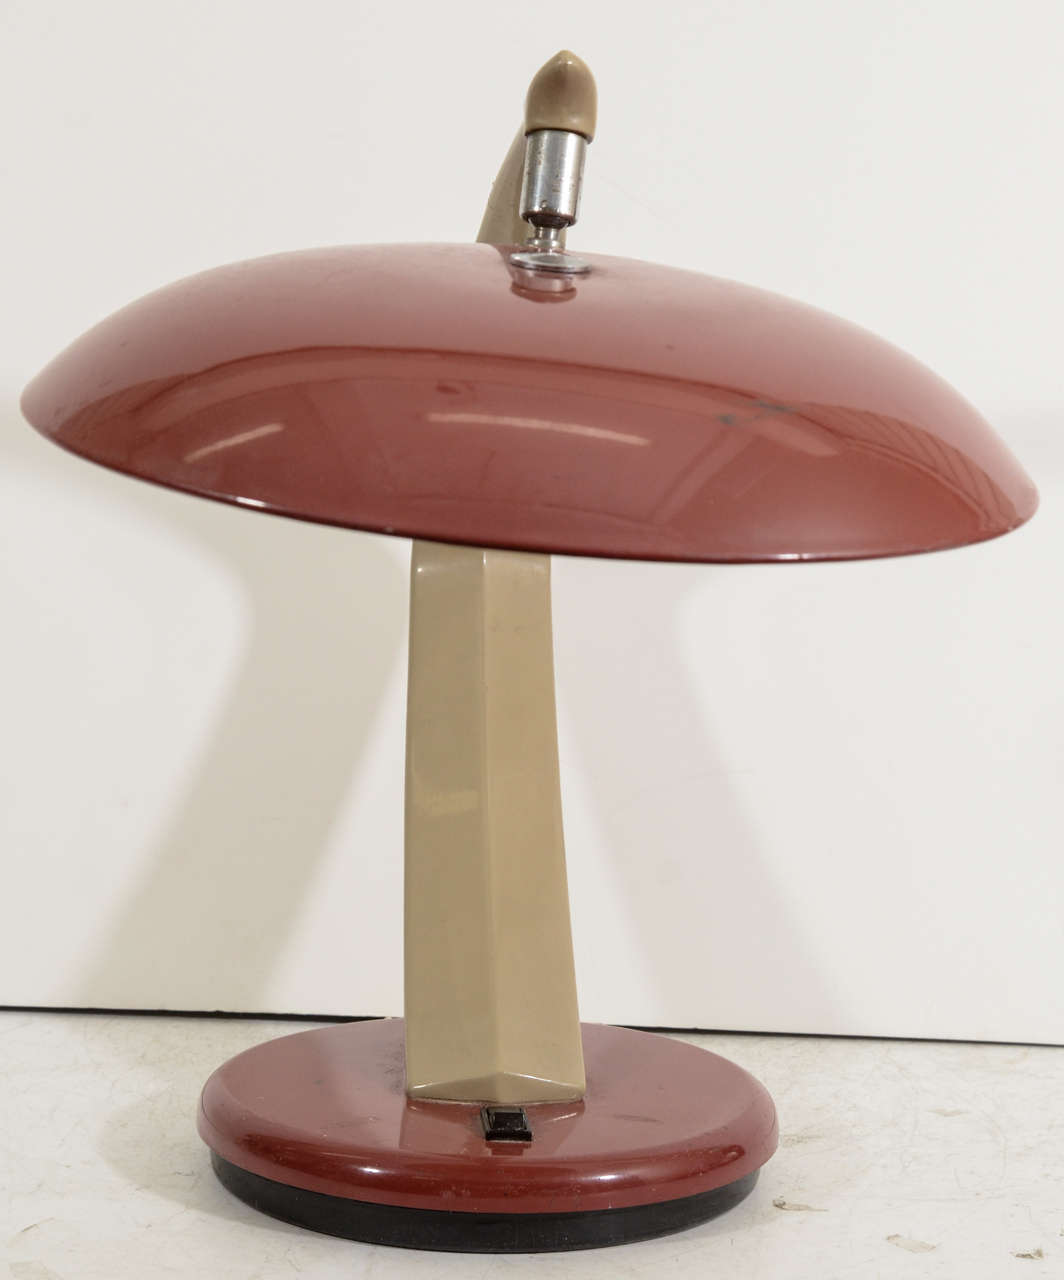 20th Century Fase Articulated Desk Lamp with Red Enamel Shade